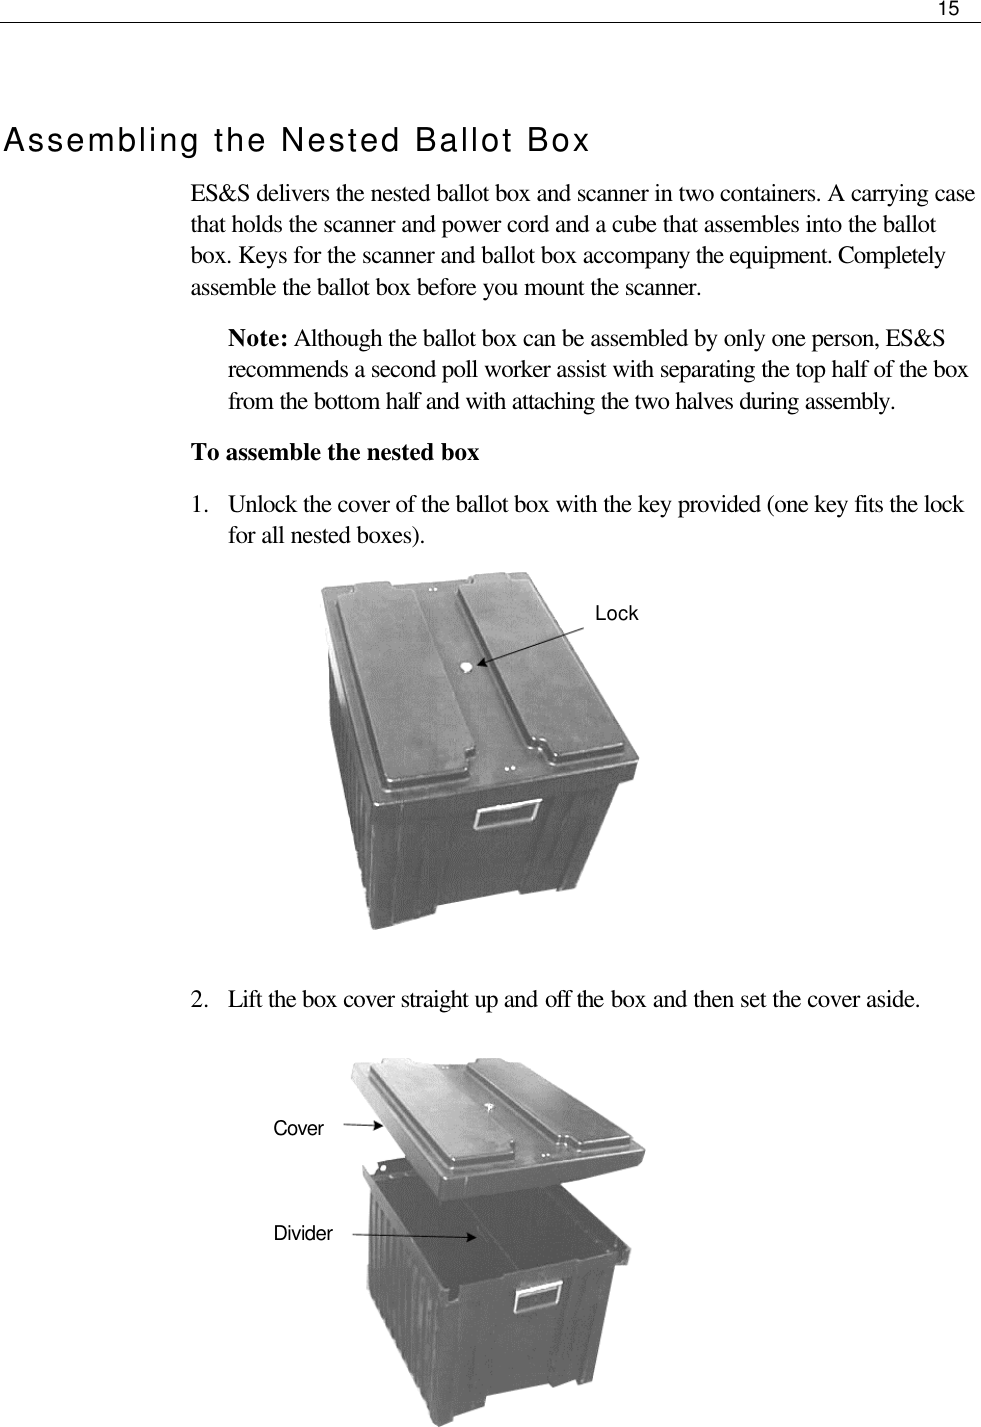     15   Assembling the Nested Ballot Box ES&amp;S delivers the nested ballot box and scanner in two containers. A carrying case that holds the scanner and power cord and a cube that assembles into the ballot box. Keys for the scanner and ballot box accompany the equipment. Completely assemble the ballot box before you mount the scanner. Note: Although the ballot box can be assembled by only one person, ES&amp;S recommends a second poll worker assist with separating the top half of the box from the bottom half and with attaching the two halves during assembly. To assemble the nested box 1.  Unlock the cover of the ballot box with the key provided (one key fits the lock for all nested boxes).                              2.  Lift the box cover straight up and off the box and then set the cover aside.                                Lock  Cover Divider 